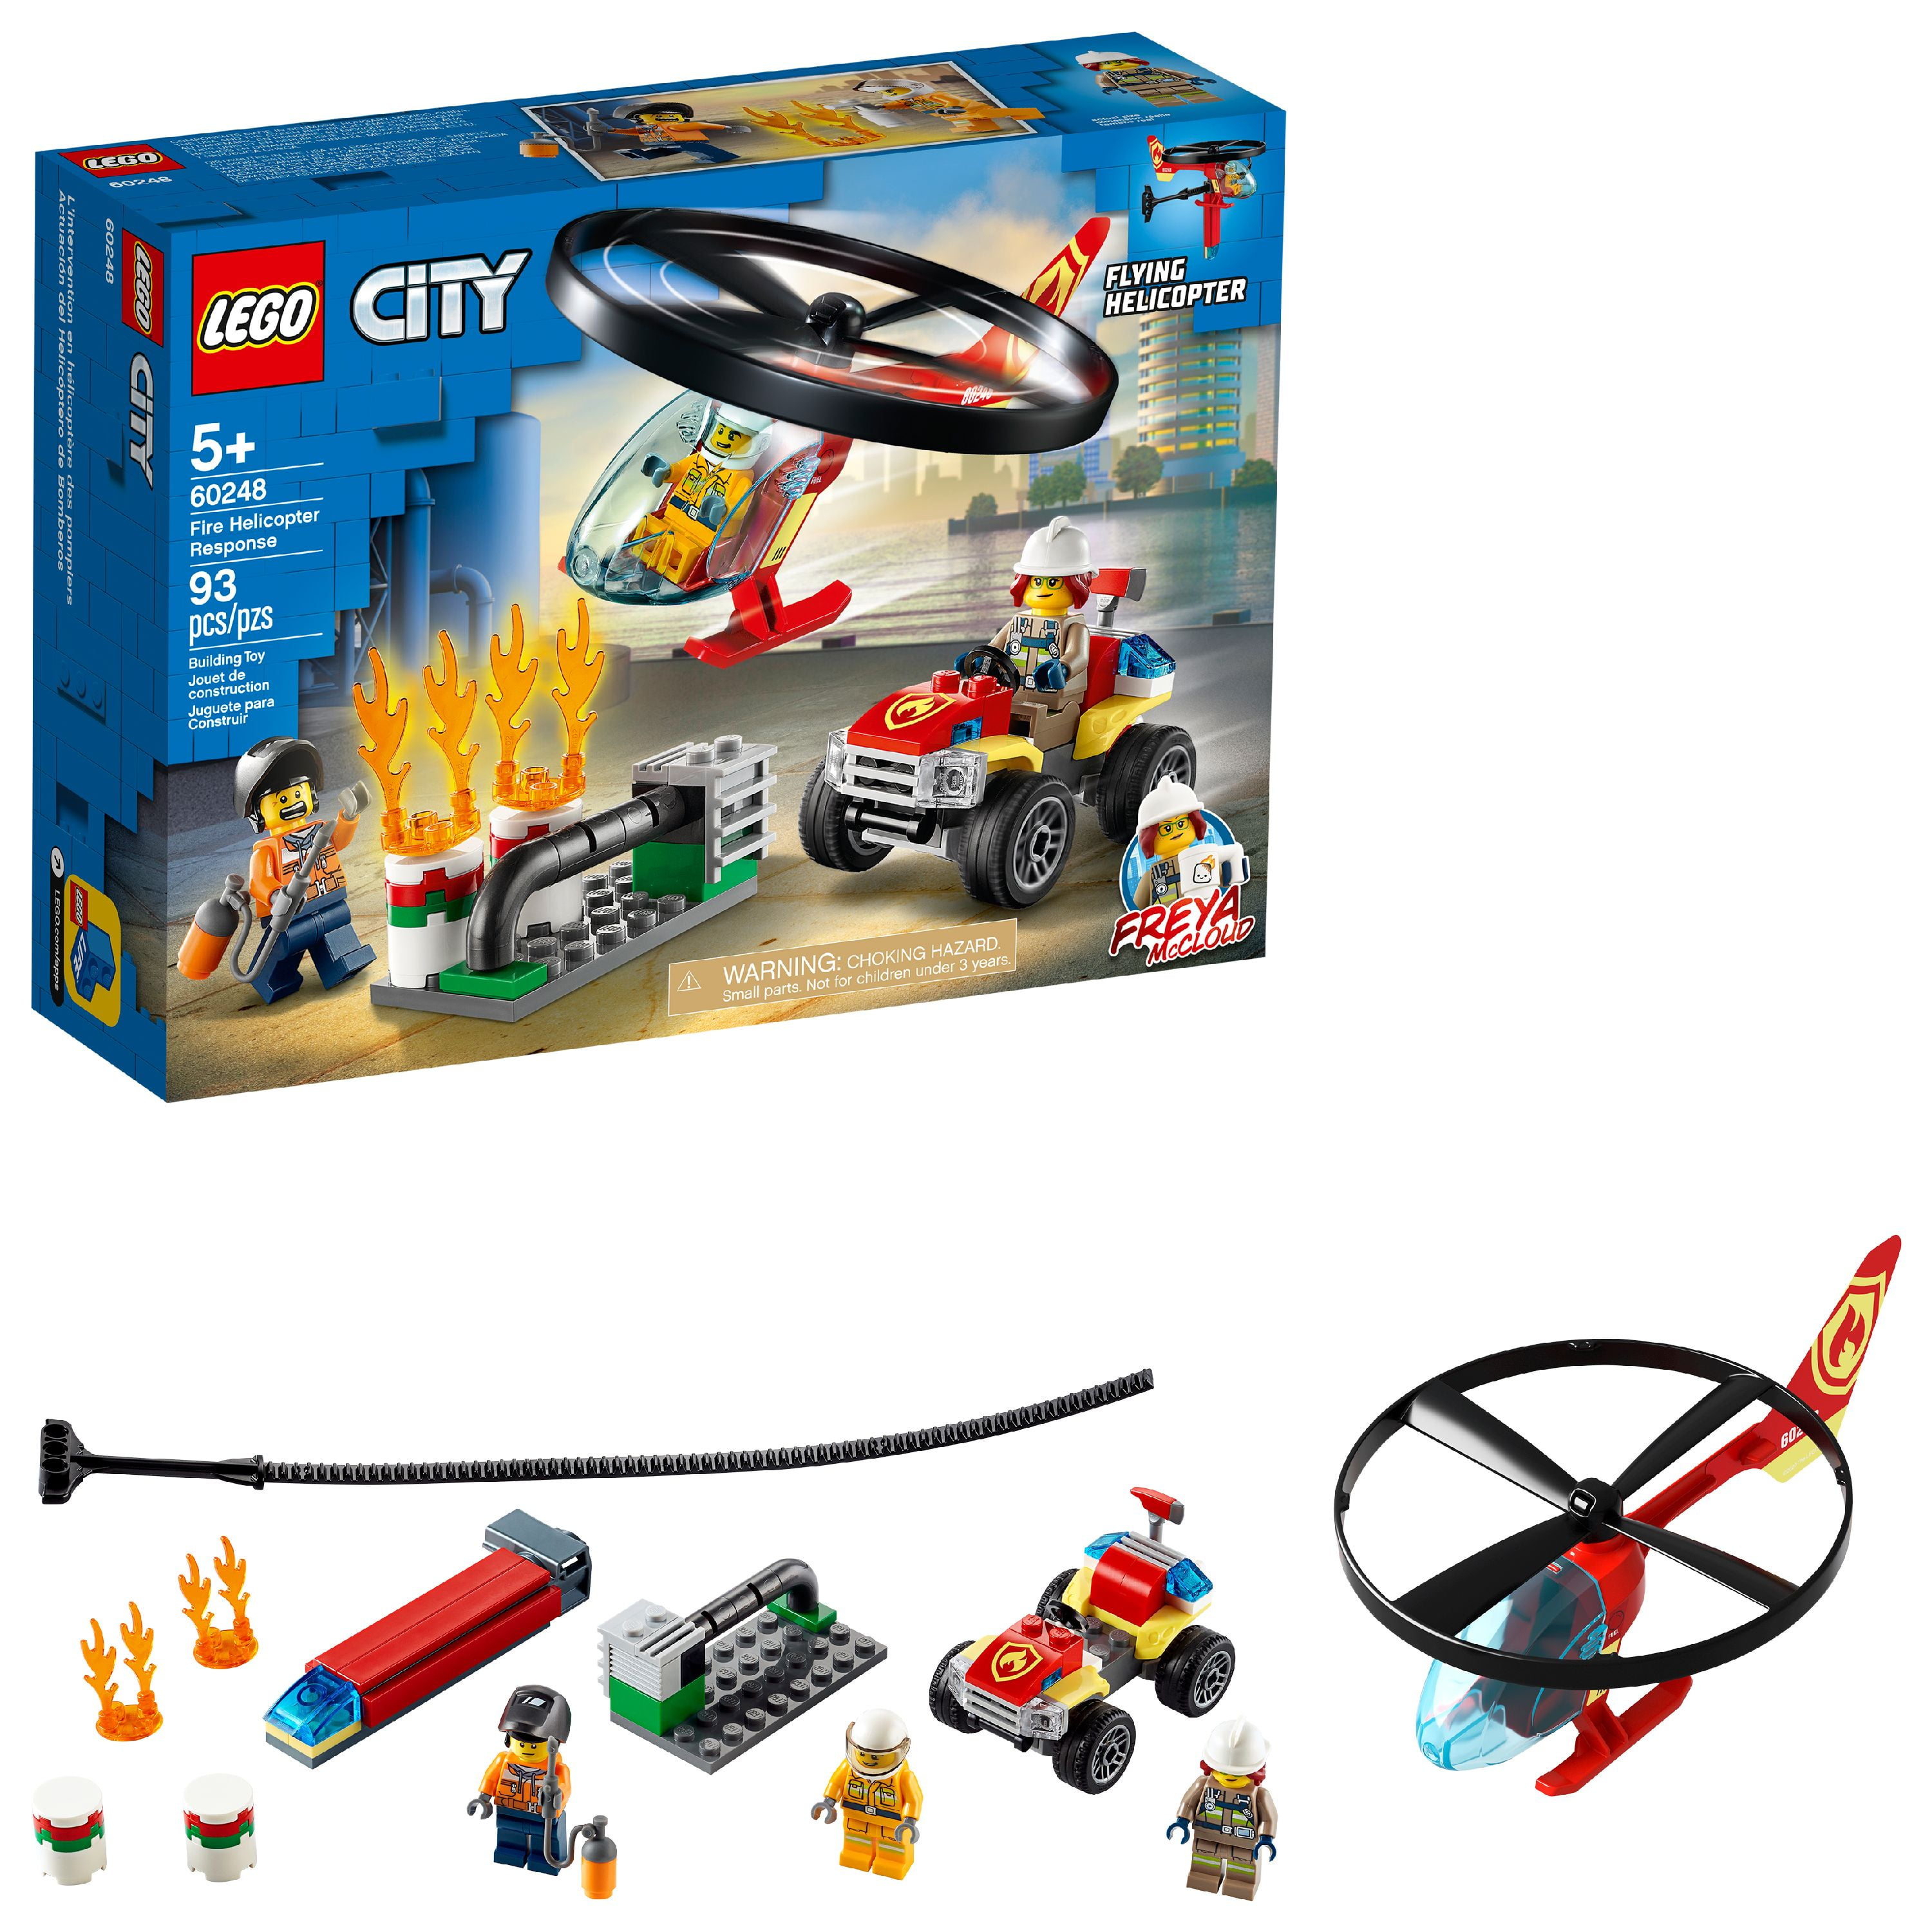 LEGO City Fire Helicopter Response 60248 Toy Firefighter Building Set for Kids (93 Pieces)